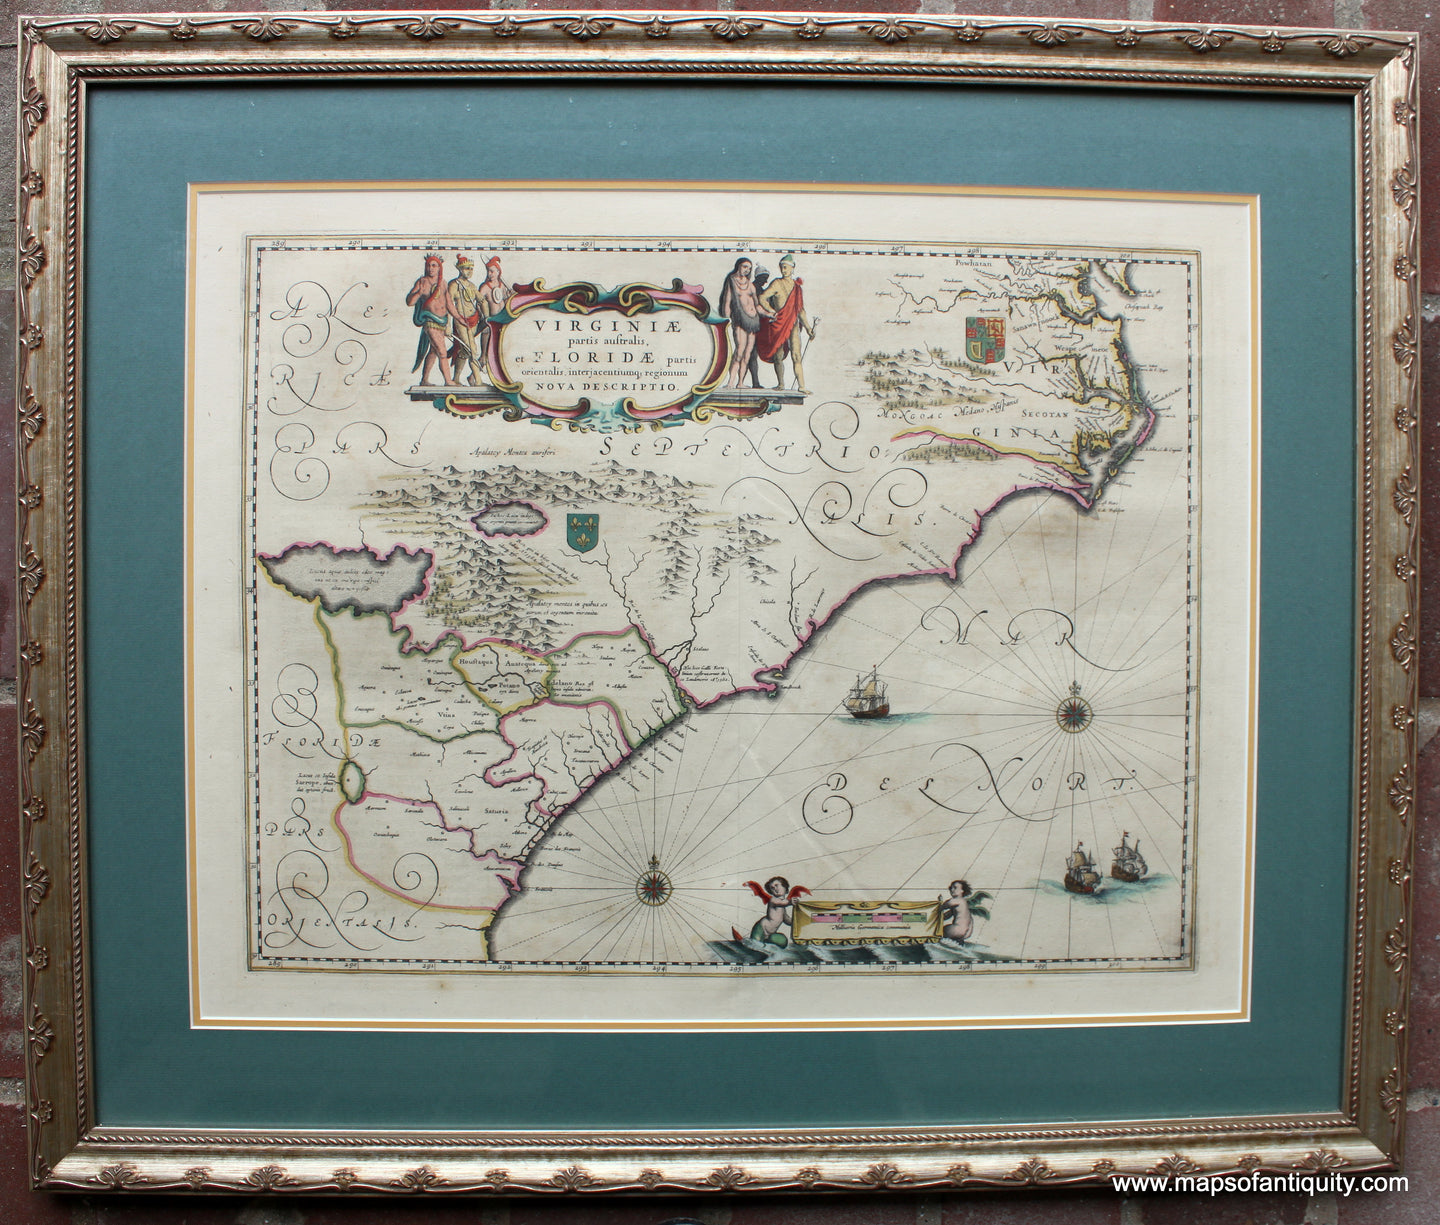 Framed-Antique-Hand-Colored-Map-South-Eastern-US---Virginiae-Partis-Australis-et-Floridae-United-States--1640-Blaeu-Maps-Of-Antiquity